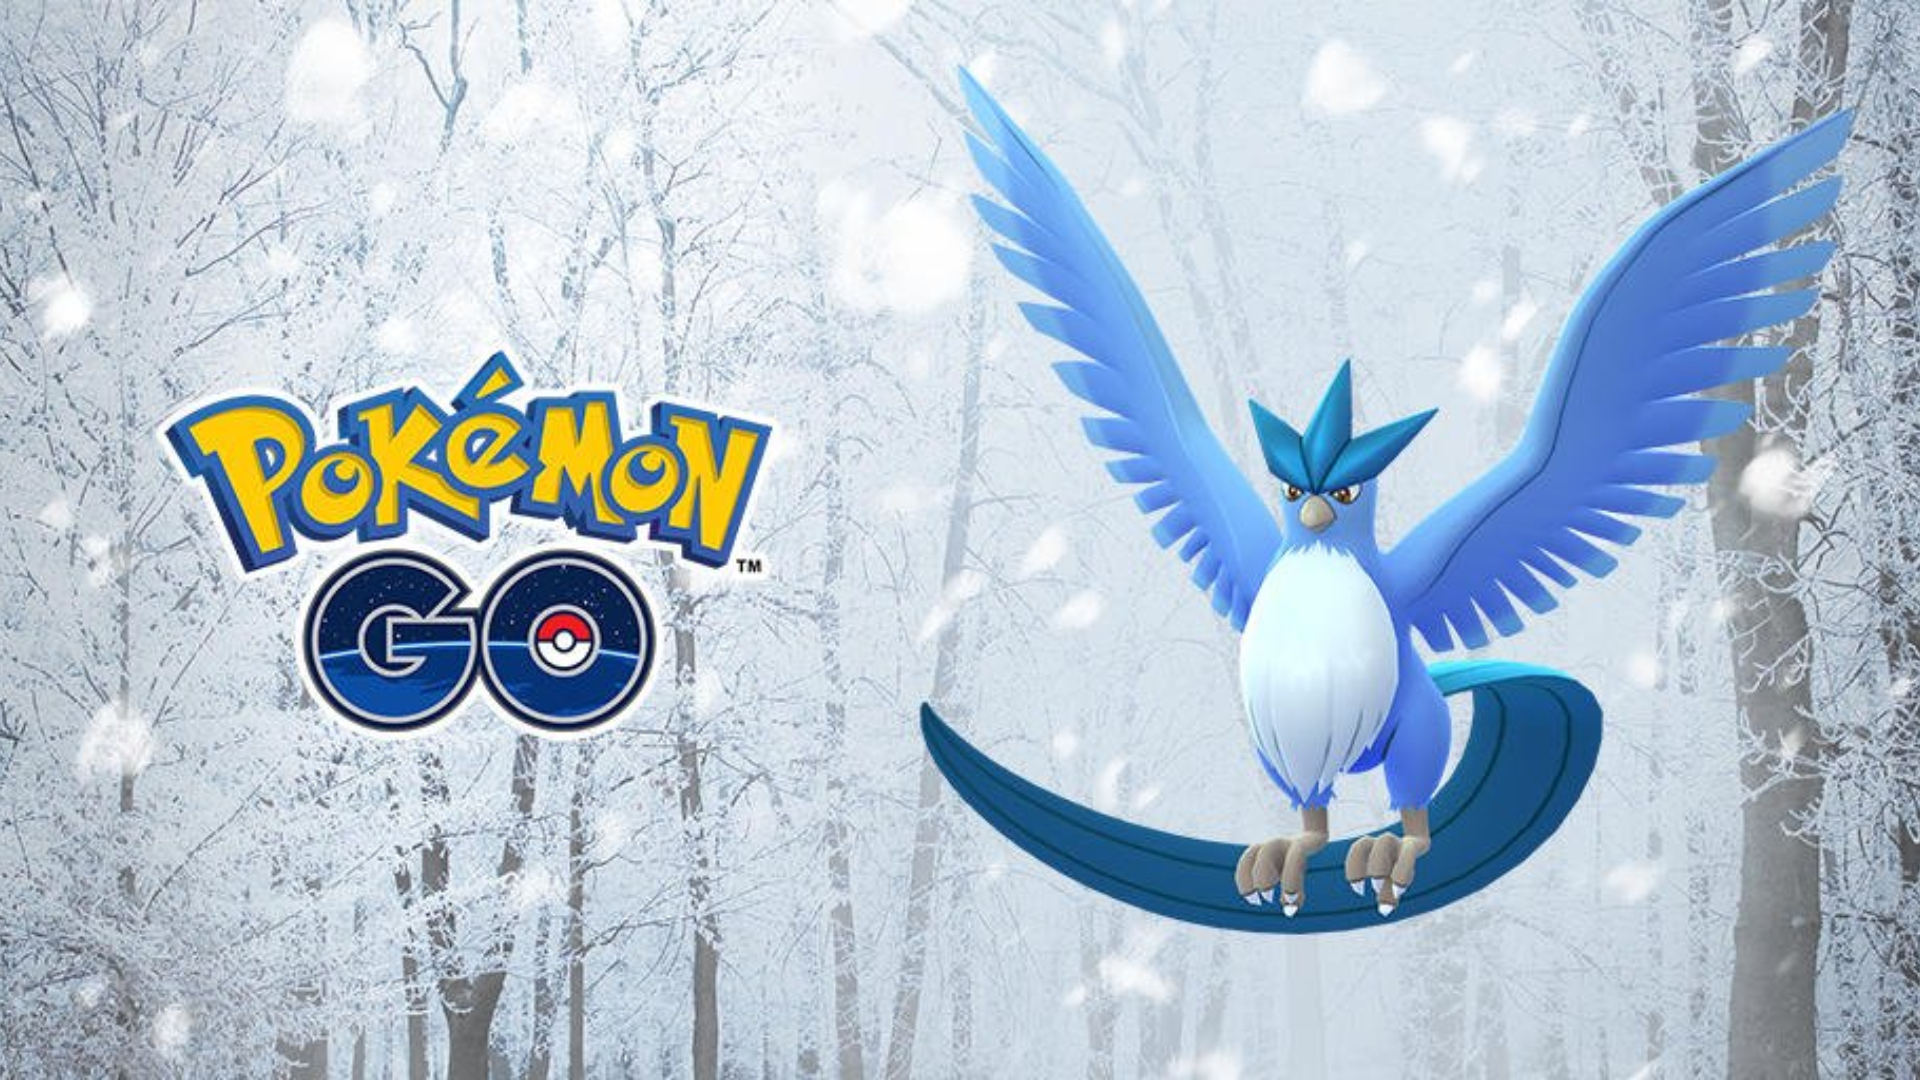 Pokemon Go's Articuno flying through a snowy forest next to the game's logo